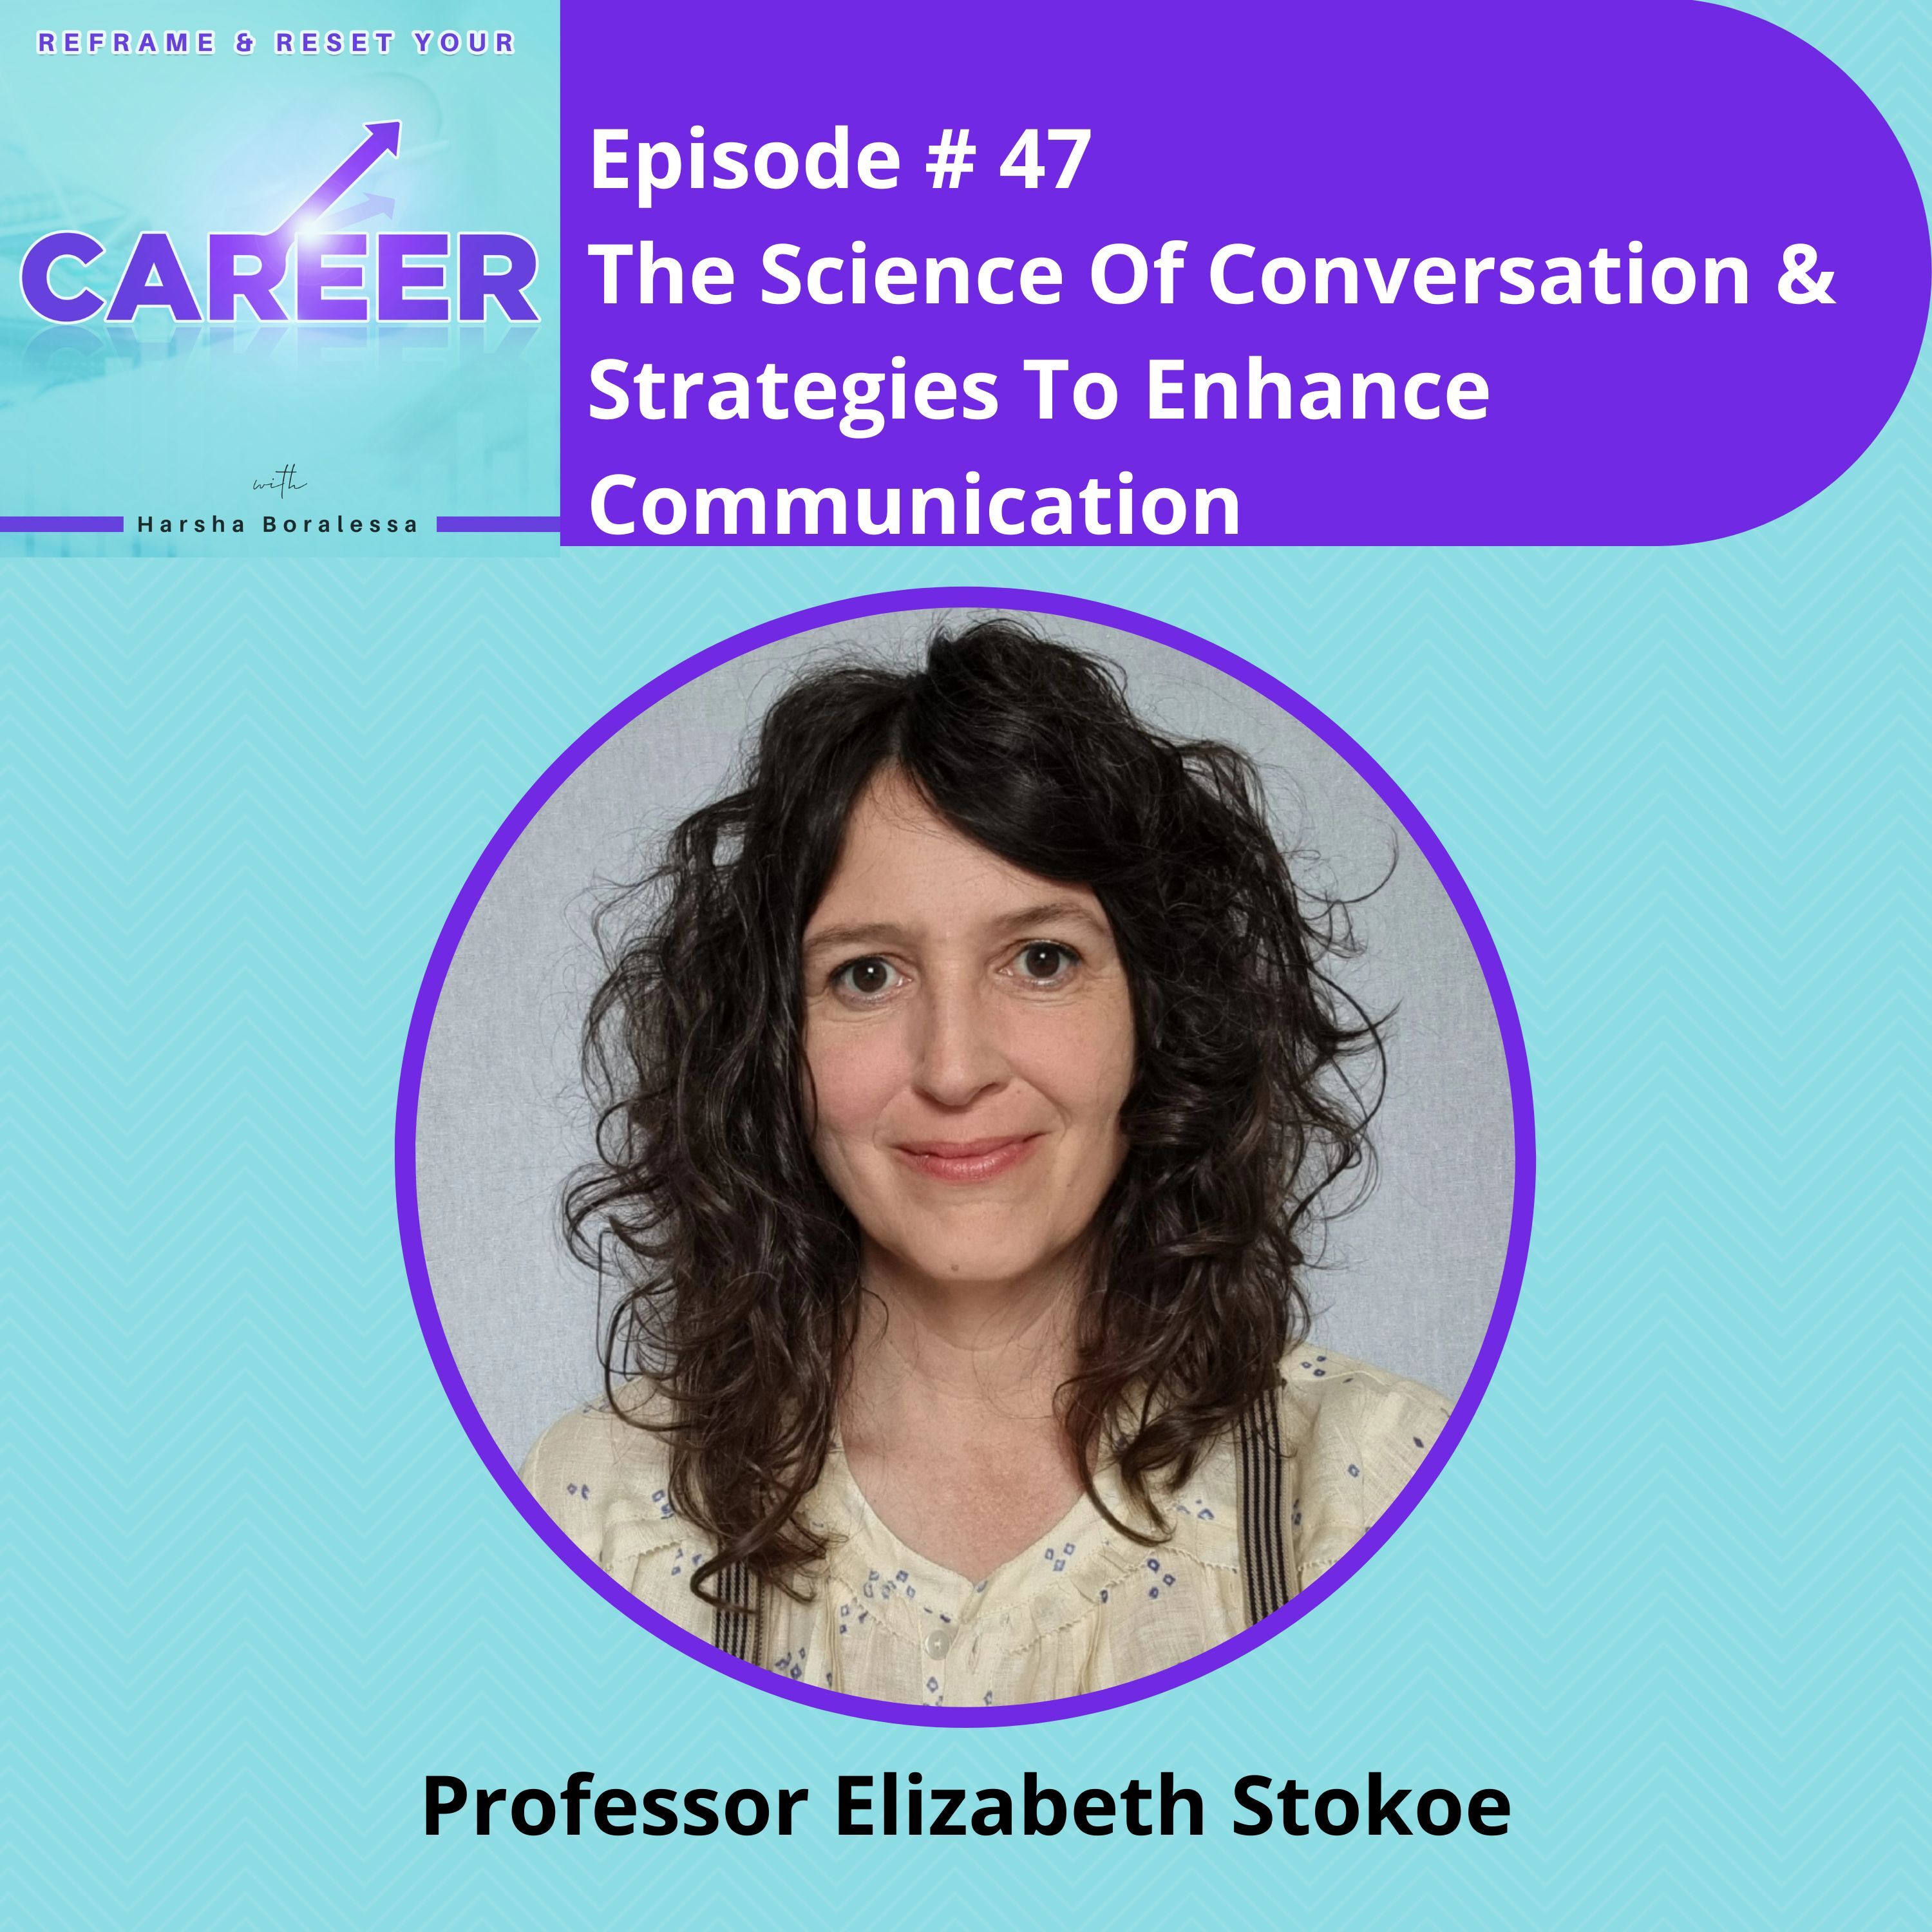 Episode 47. The Science Of Conversation & Strategies To Enhance Communication